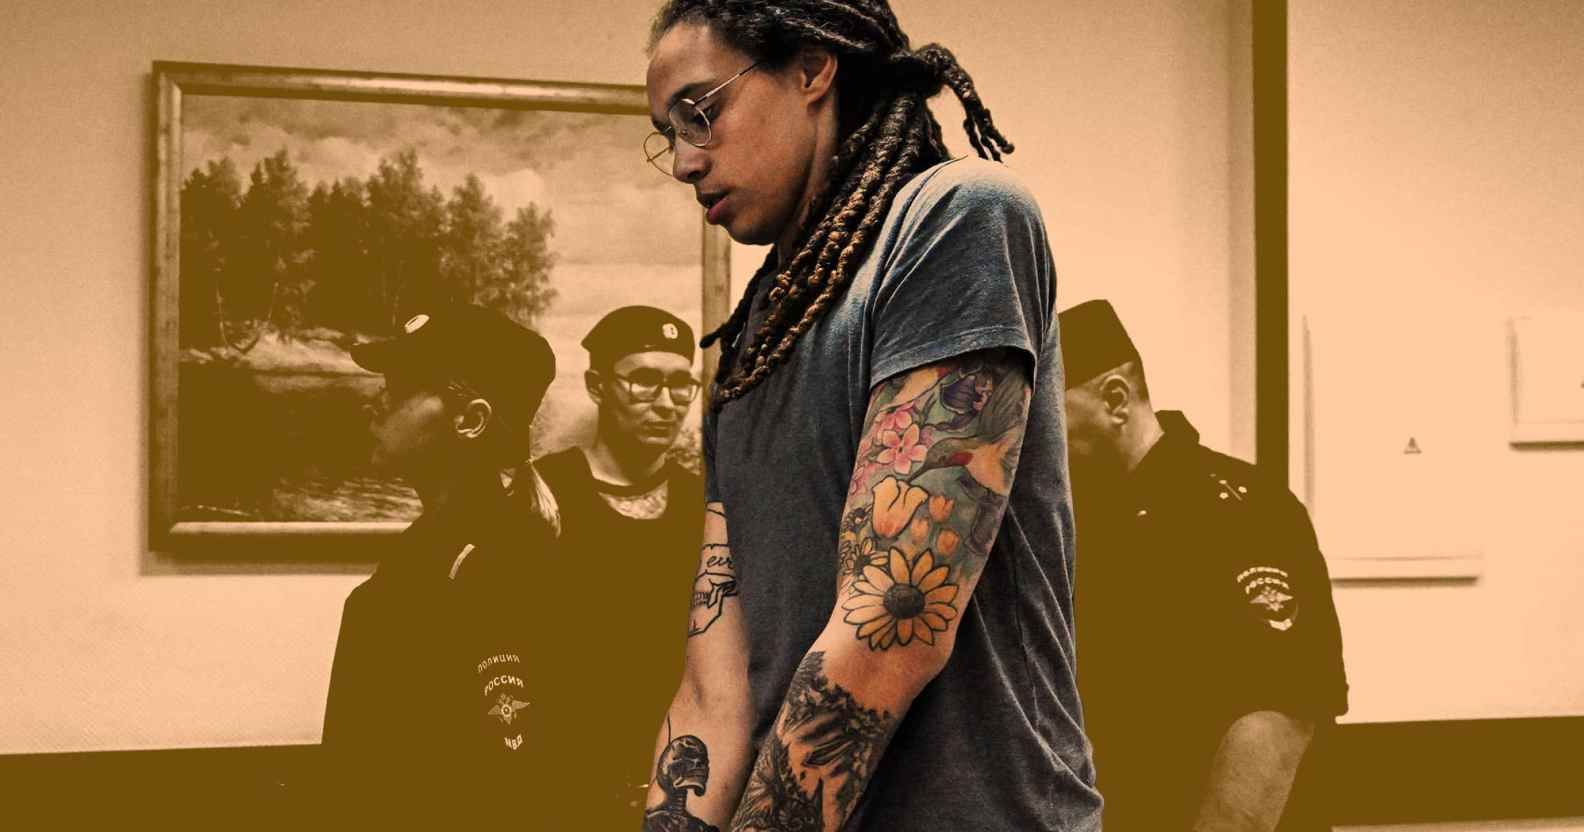 Basketball star Brittney Griner is shown handcuffed against a sepia-toned background with Russian guards behind her